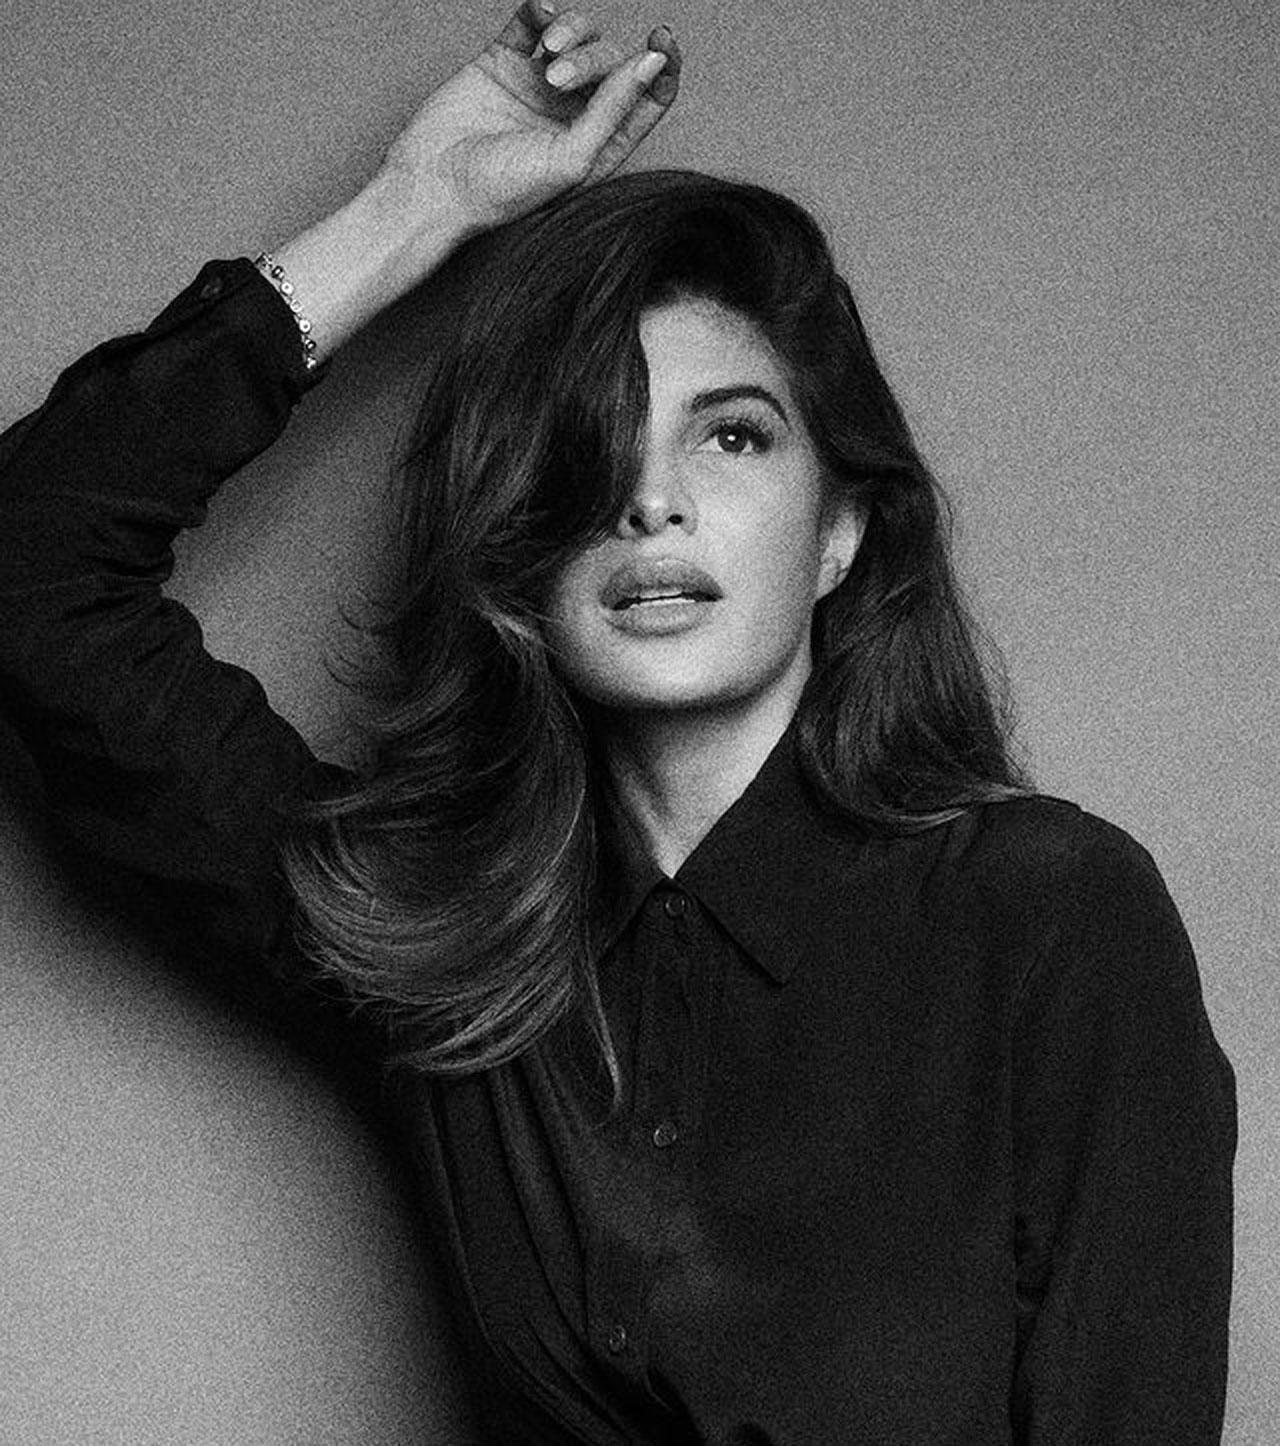 Jacqueline Fernandez took to her social media and shared some monochrome pictures with fans. The actress took up the poses describing the beauty of staying grounded.